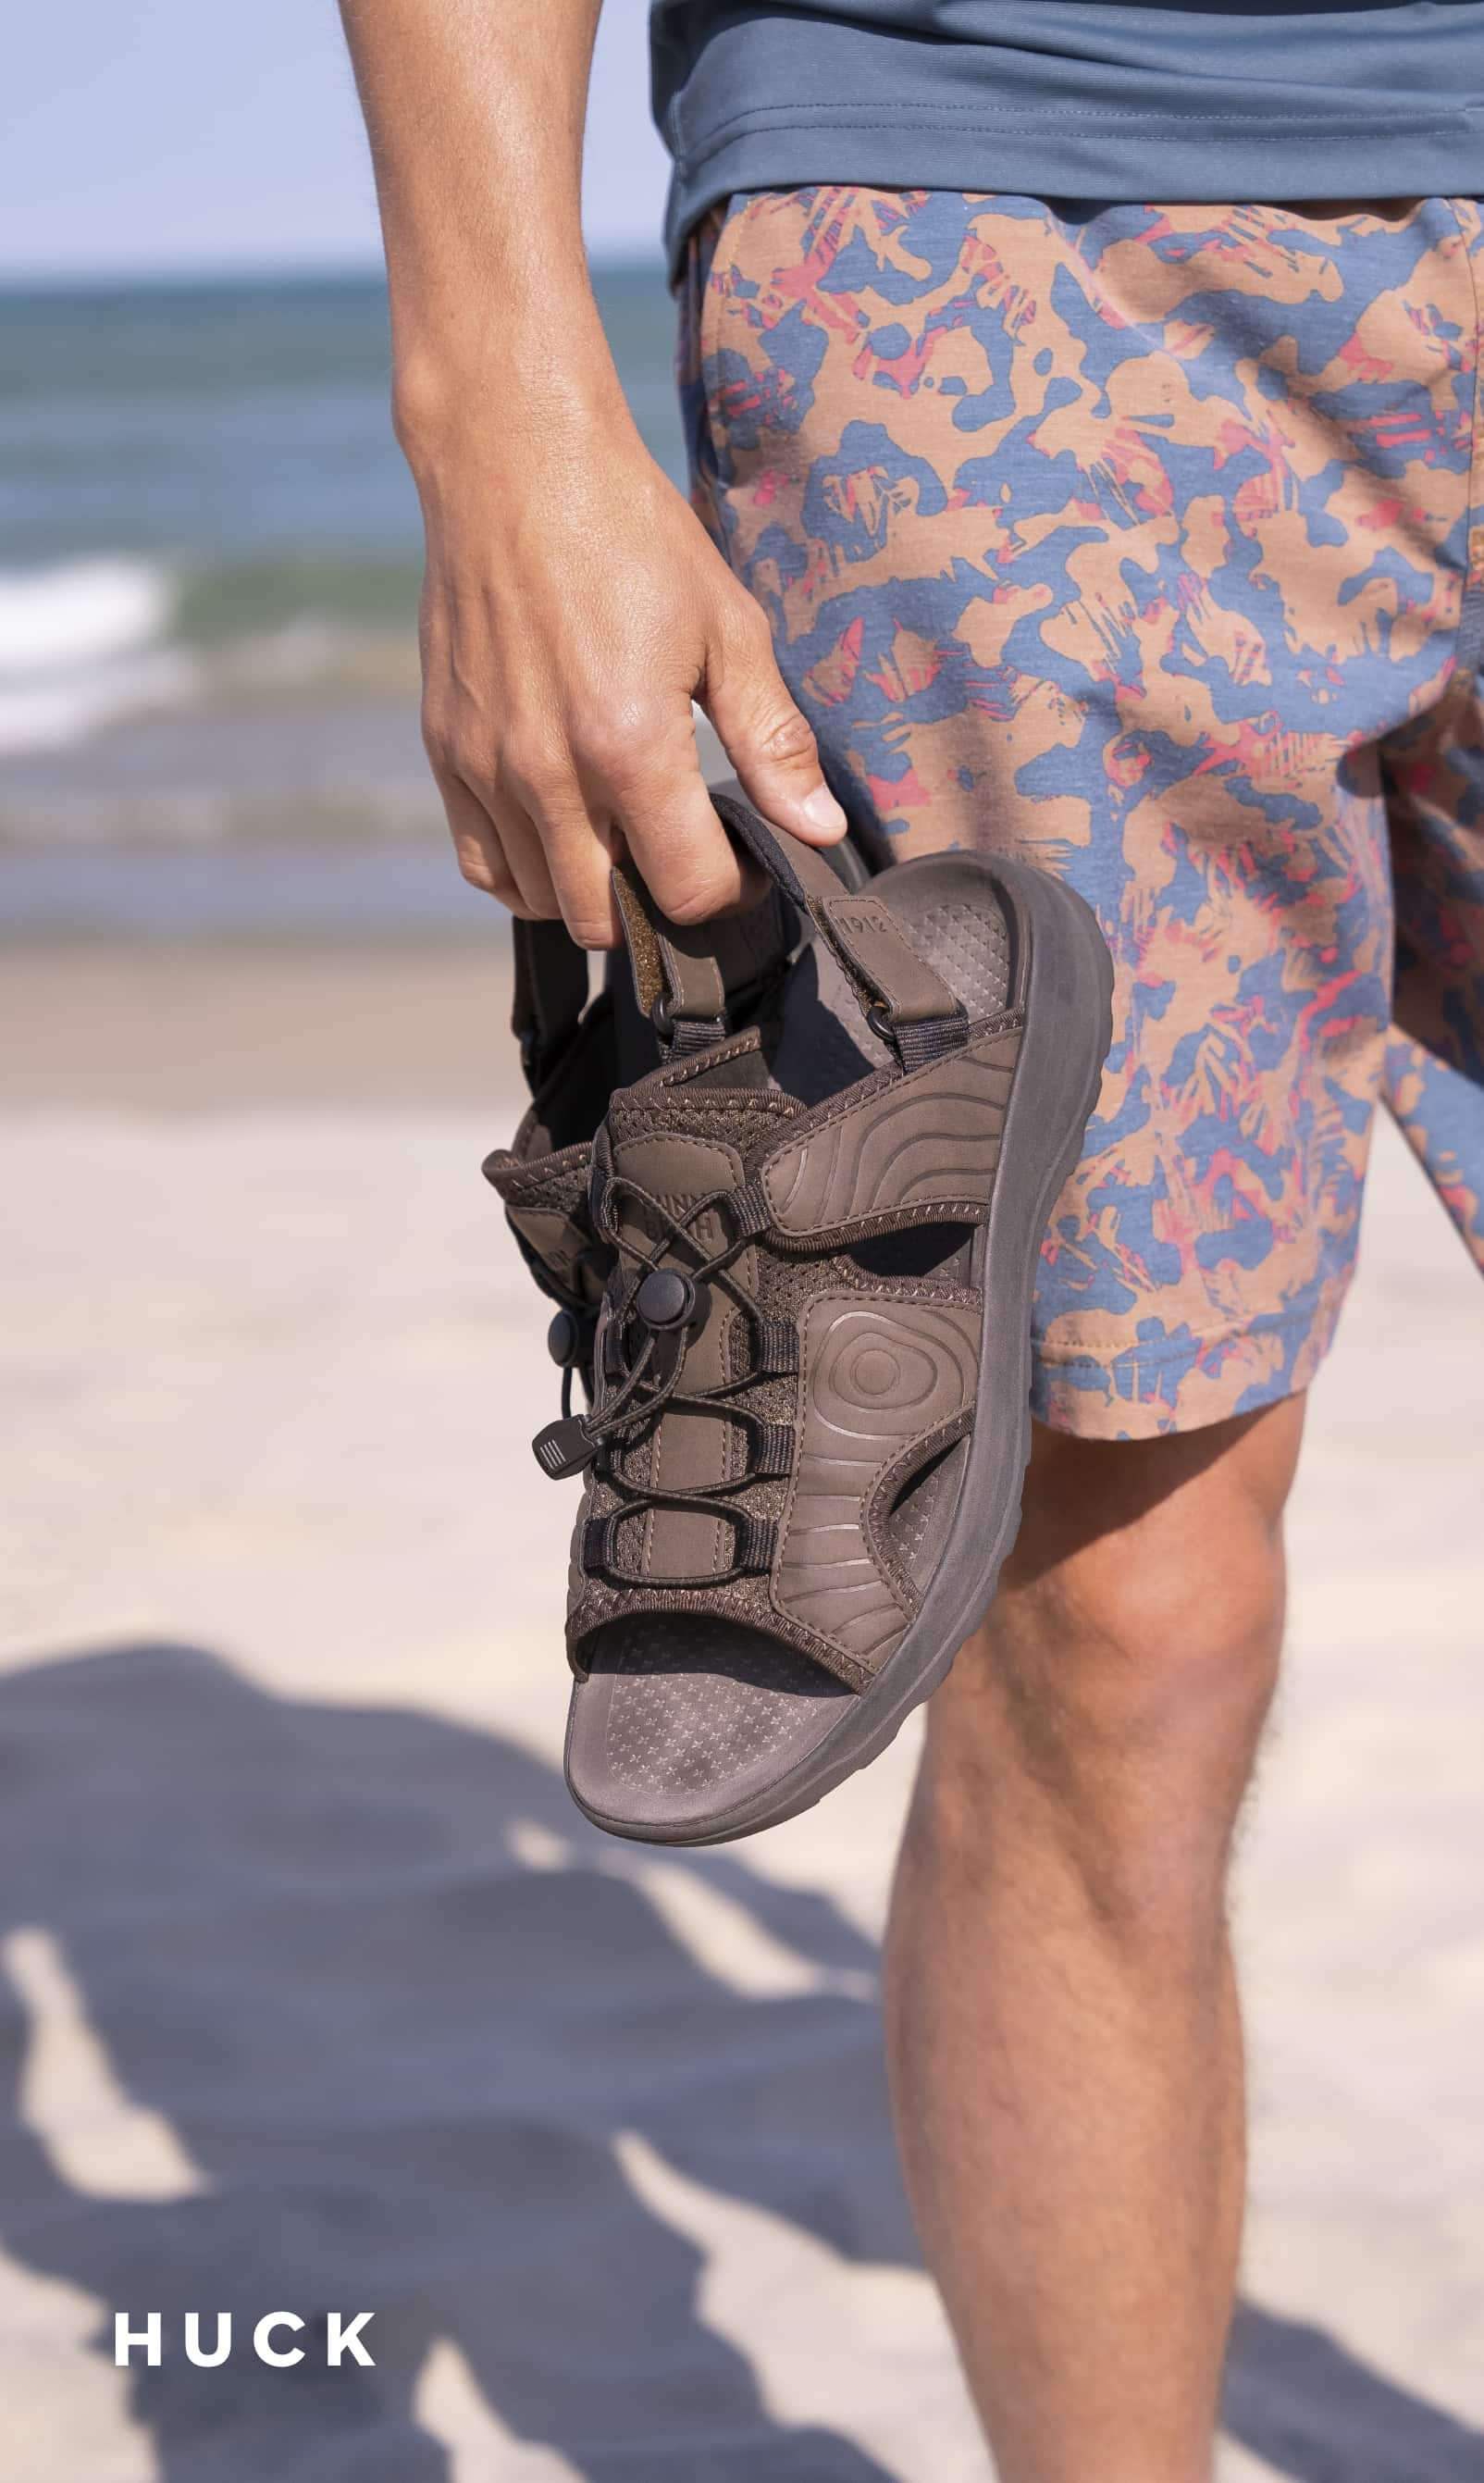 Men's Sandals category. Image features the Huck Bungee sandal in brown.